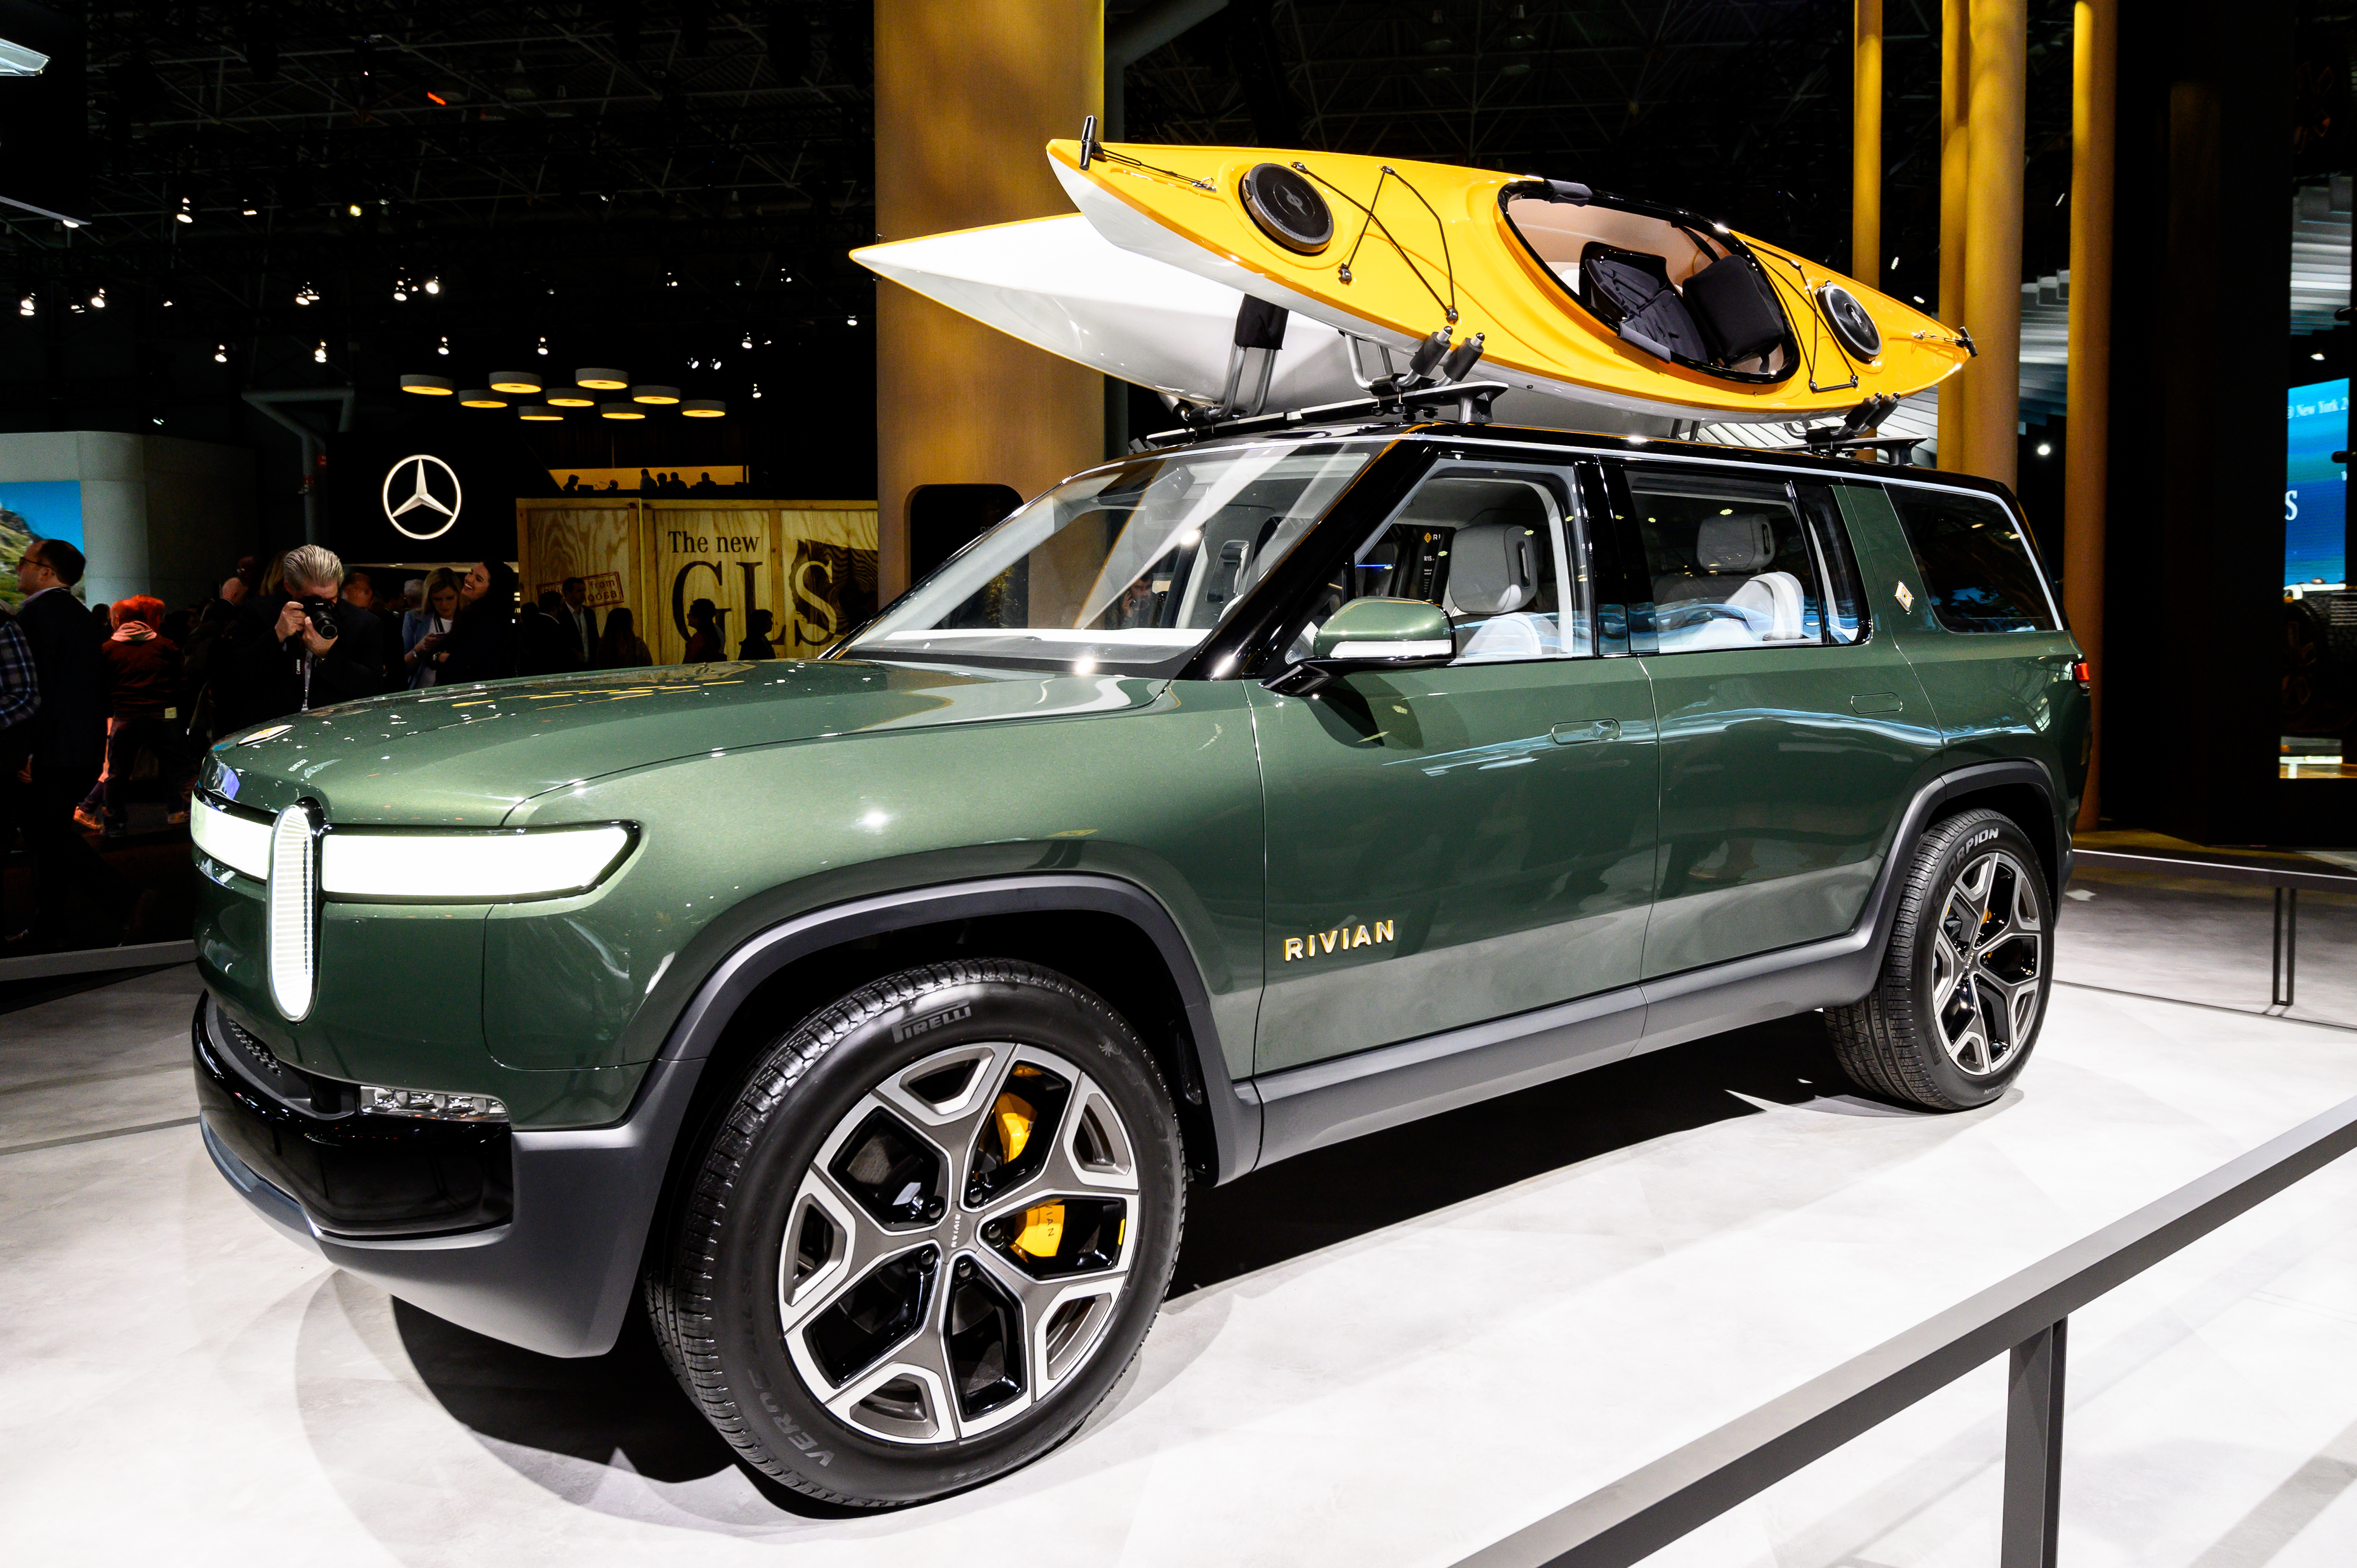 Rivian plans to have a network of 10,000 EV chargers in North America by 2023